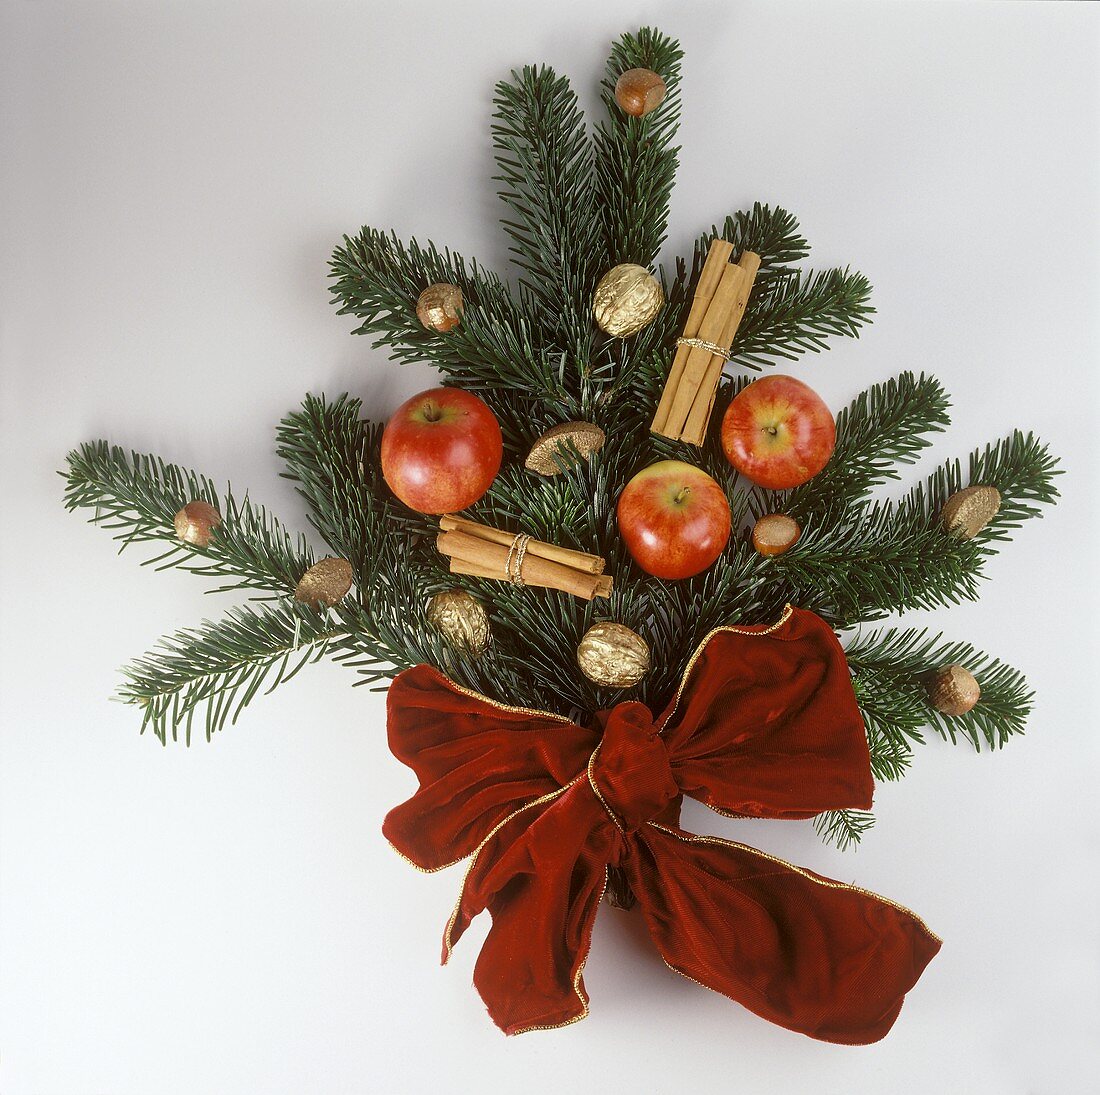 Christmas decoration made of fir branches, apples, gold nuts